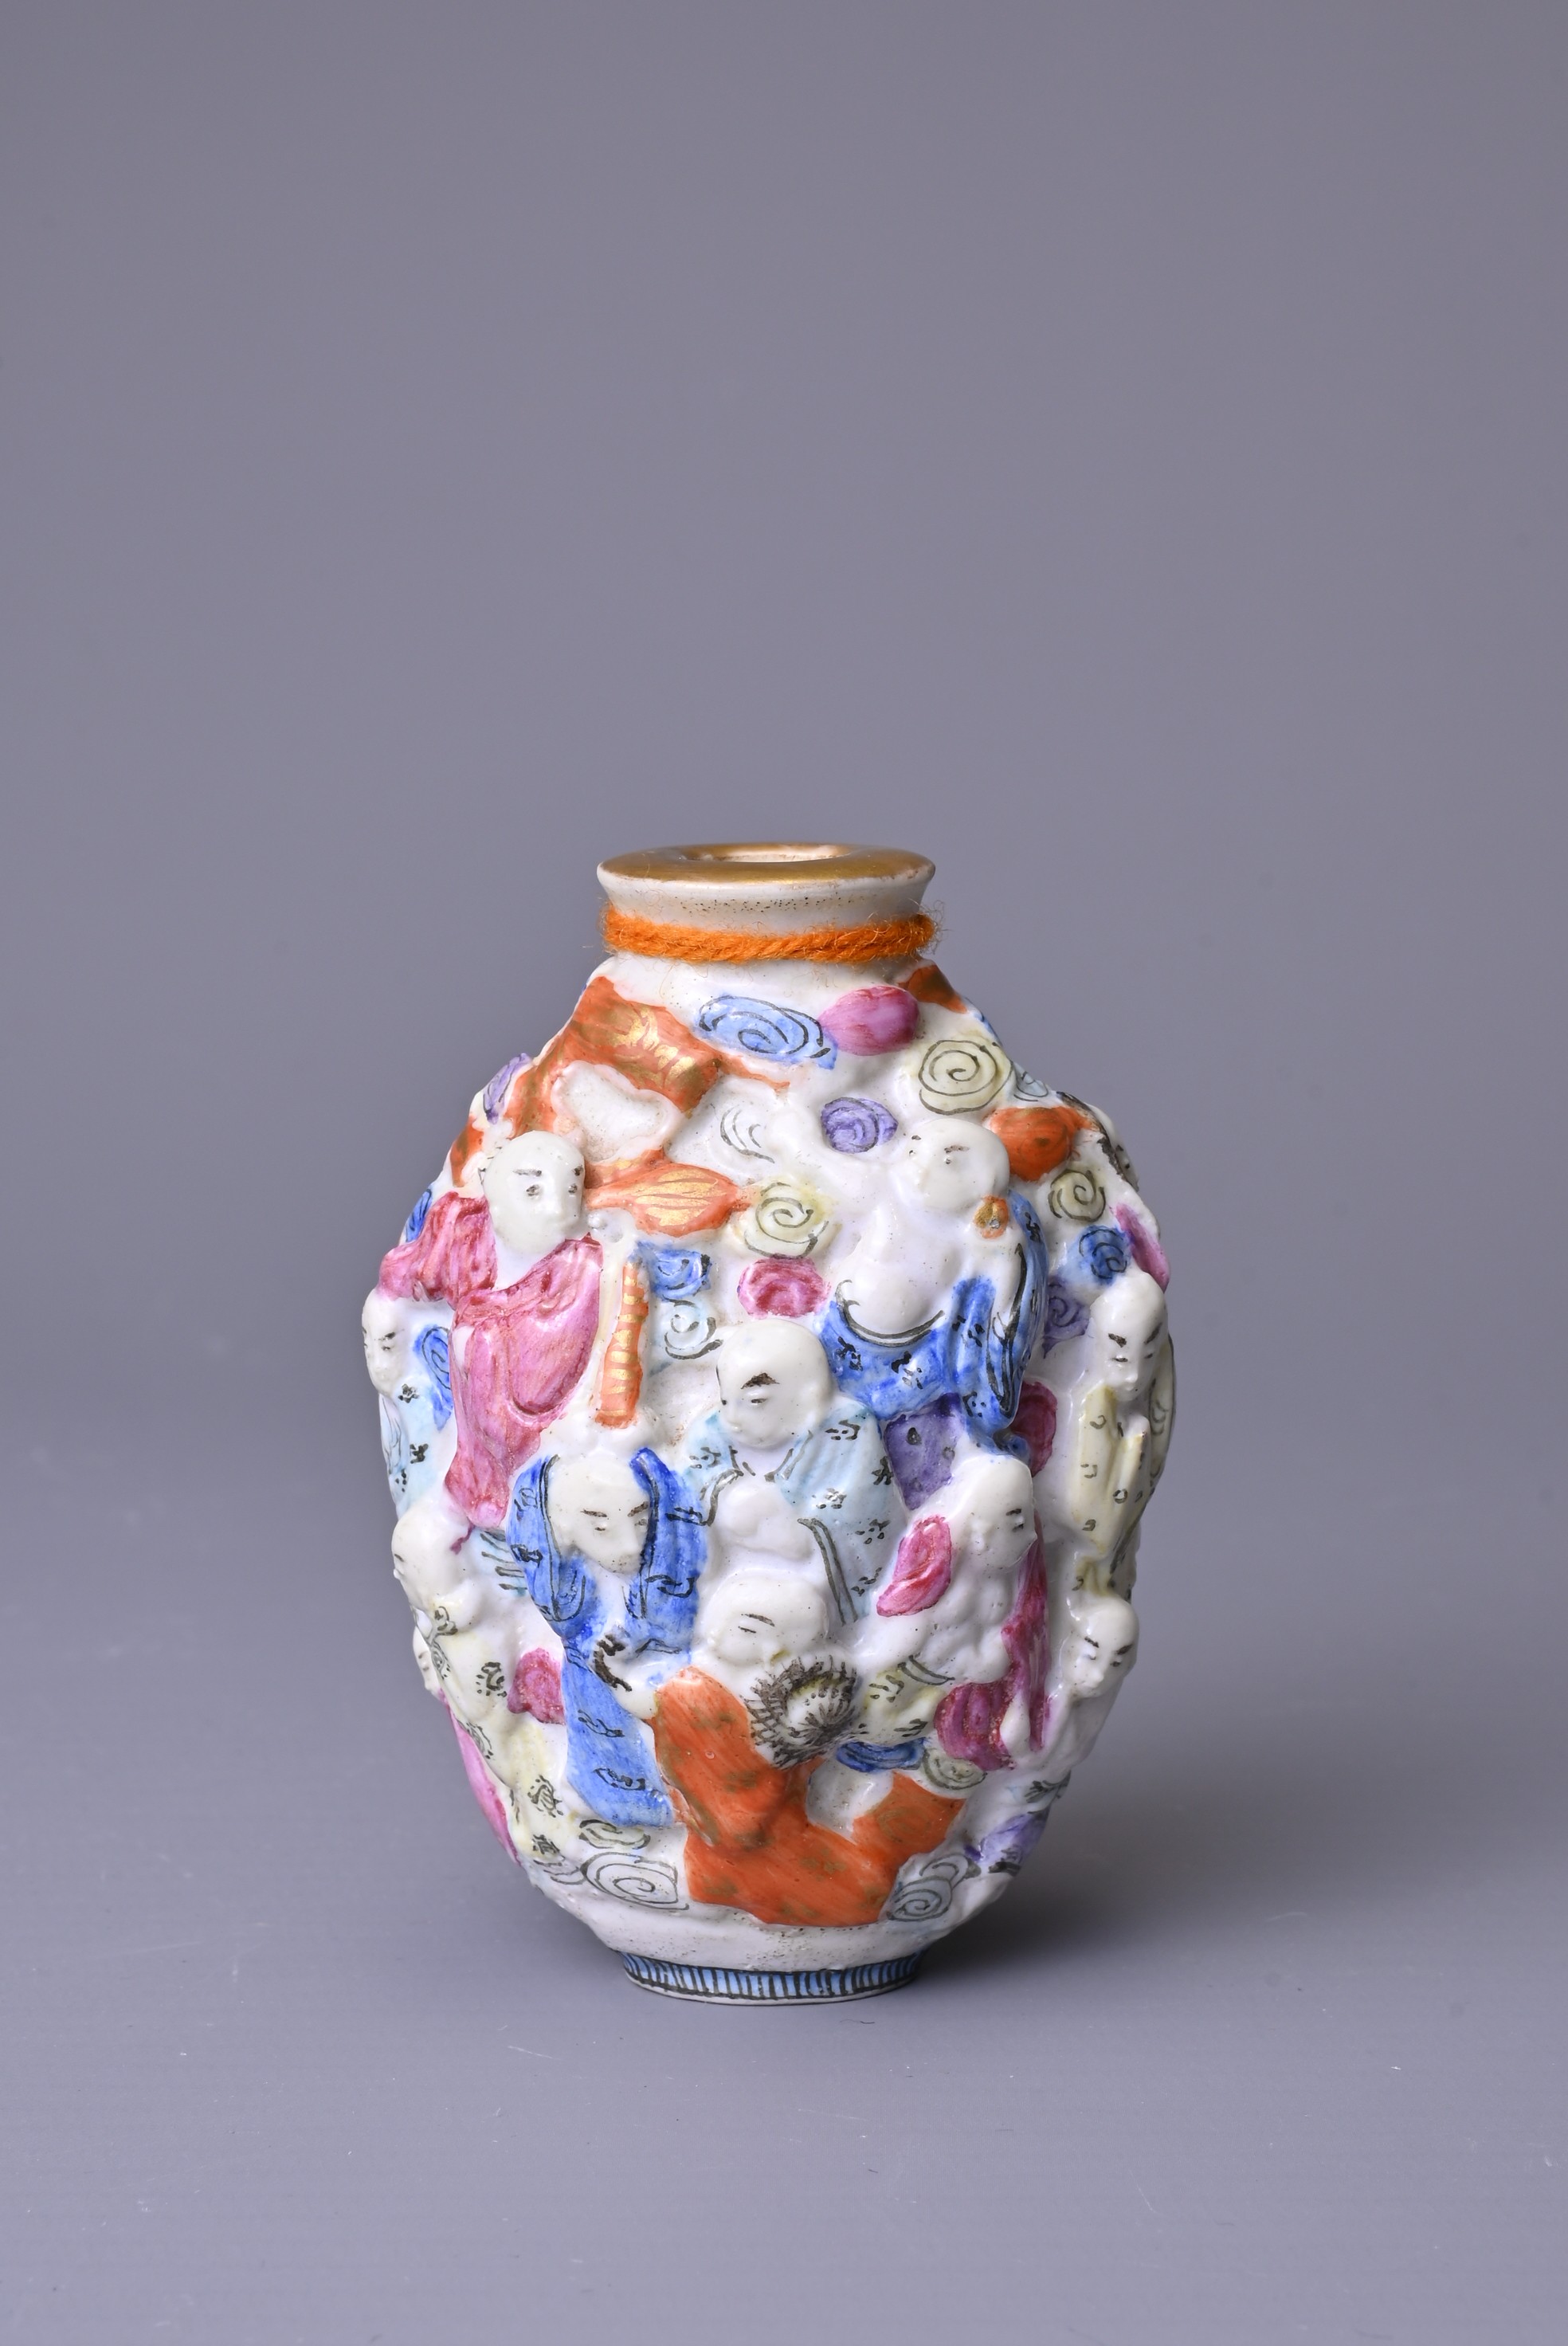 A CHINESE FAMILLE ROSE PORCELAIN SNUFF BOTTLE, 19TH CENTURY. Moulded with the Eighteen Luohan